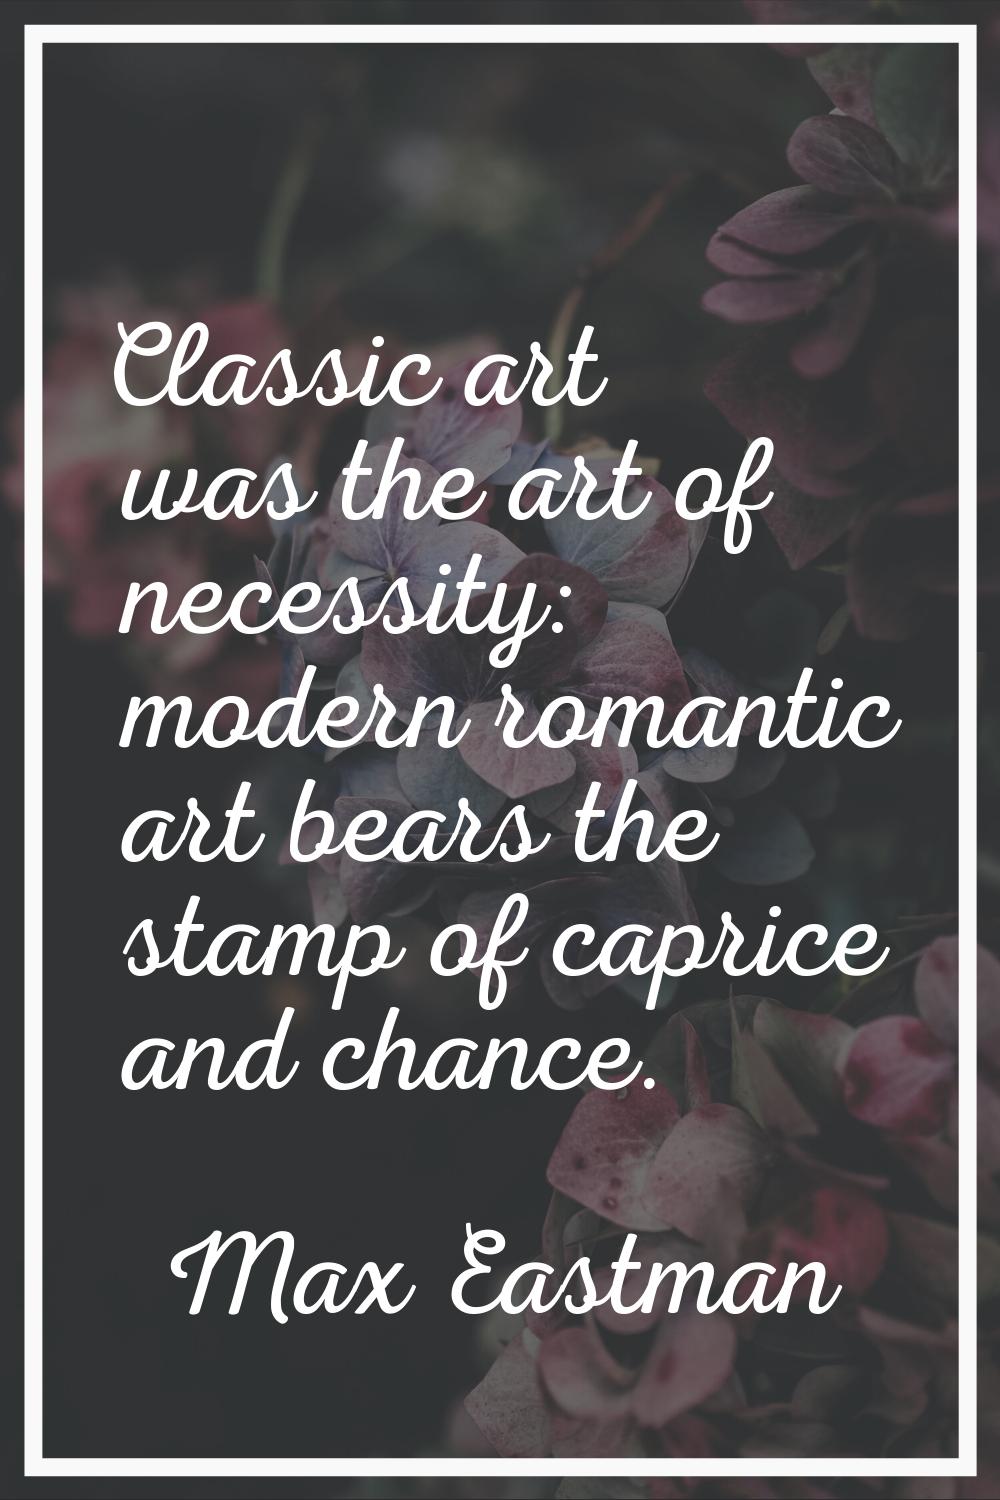 Classic art was the art of necessity: modern romantic art bears the stamp of caprice and chance.